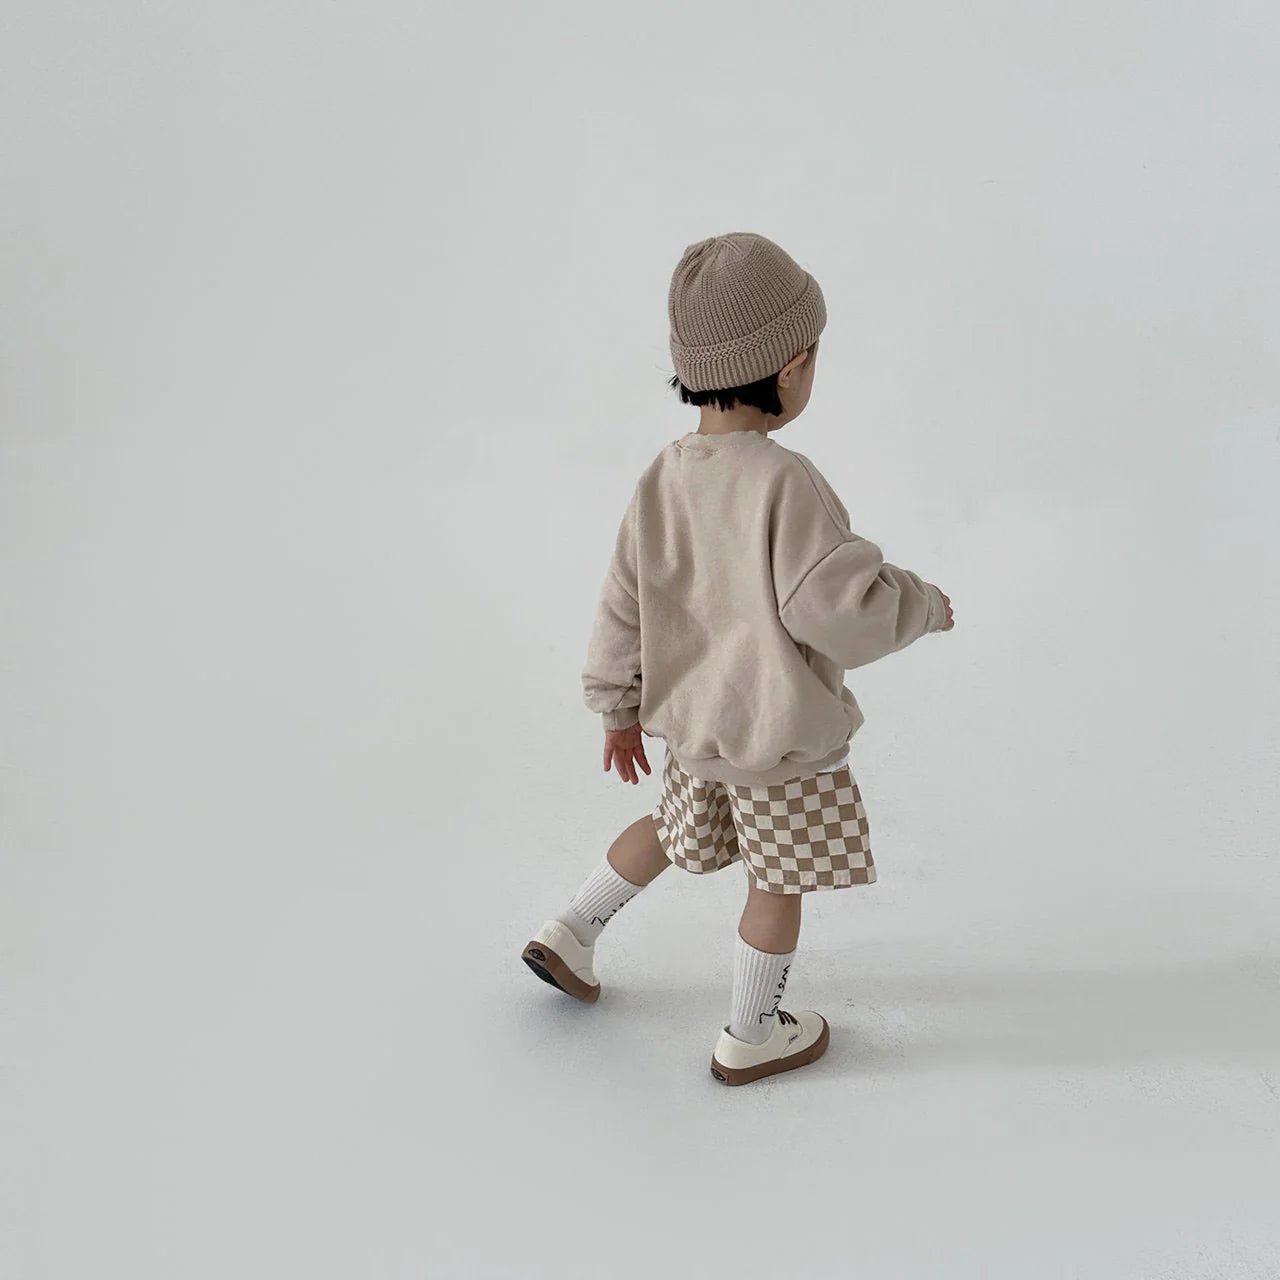 Checker Board Shorts find Stylish Fashion for Little People- at Little Foxx Concept Store